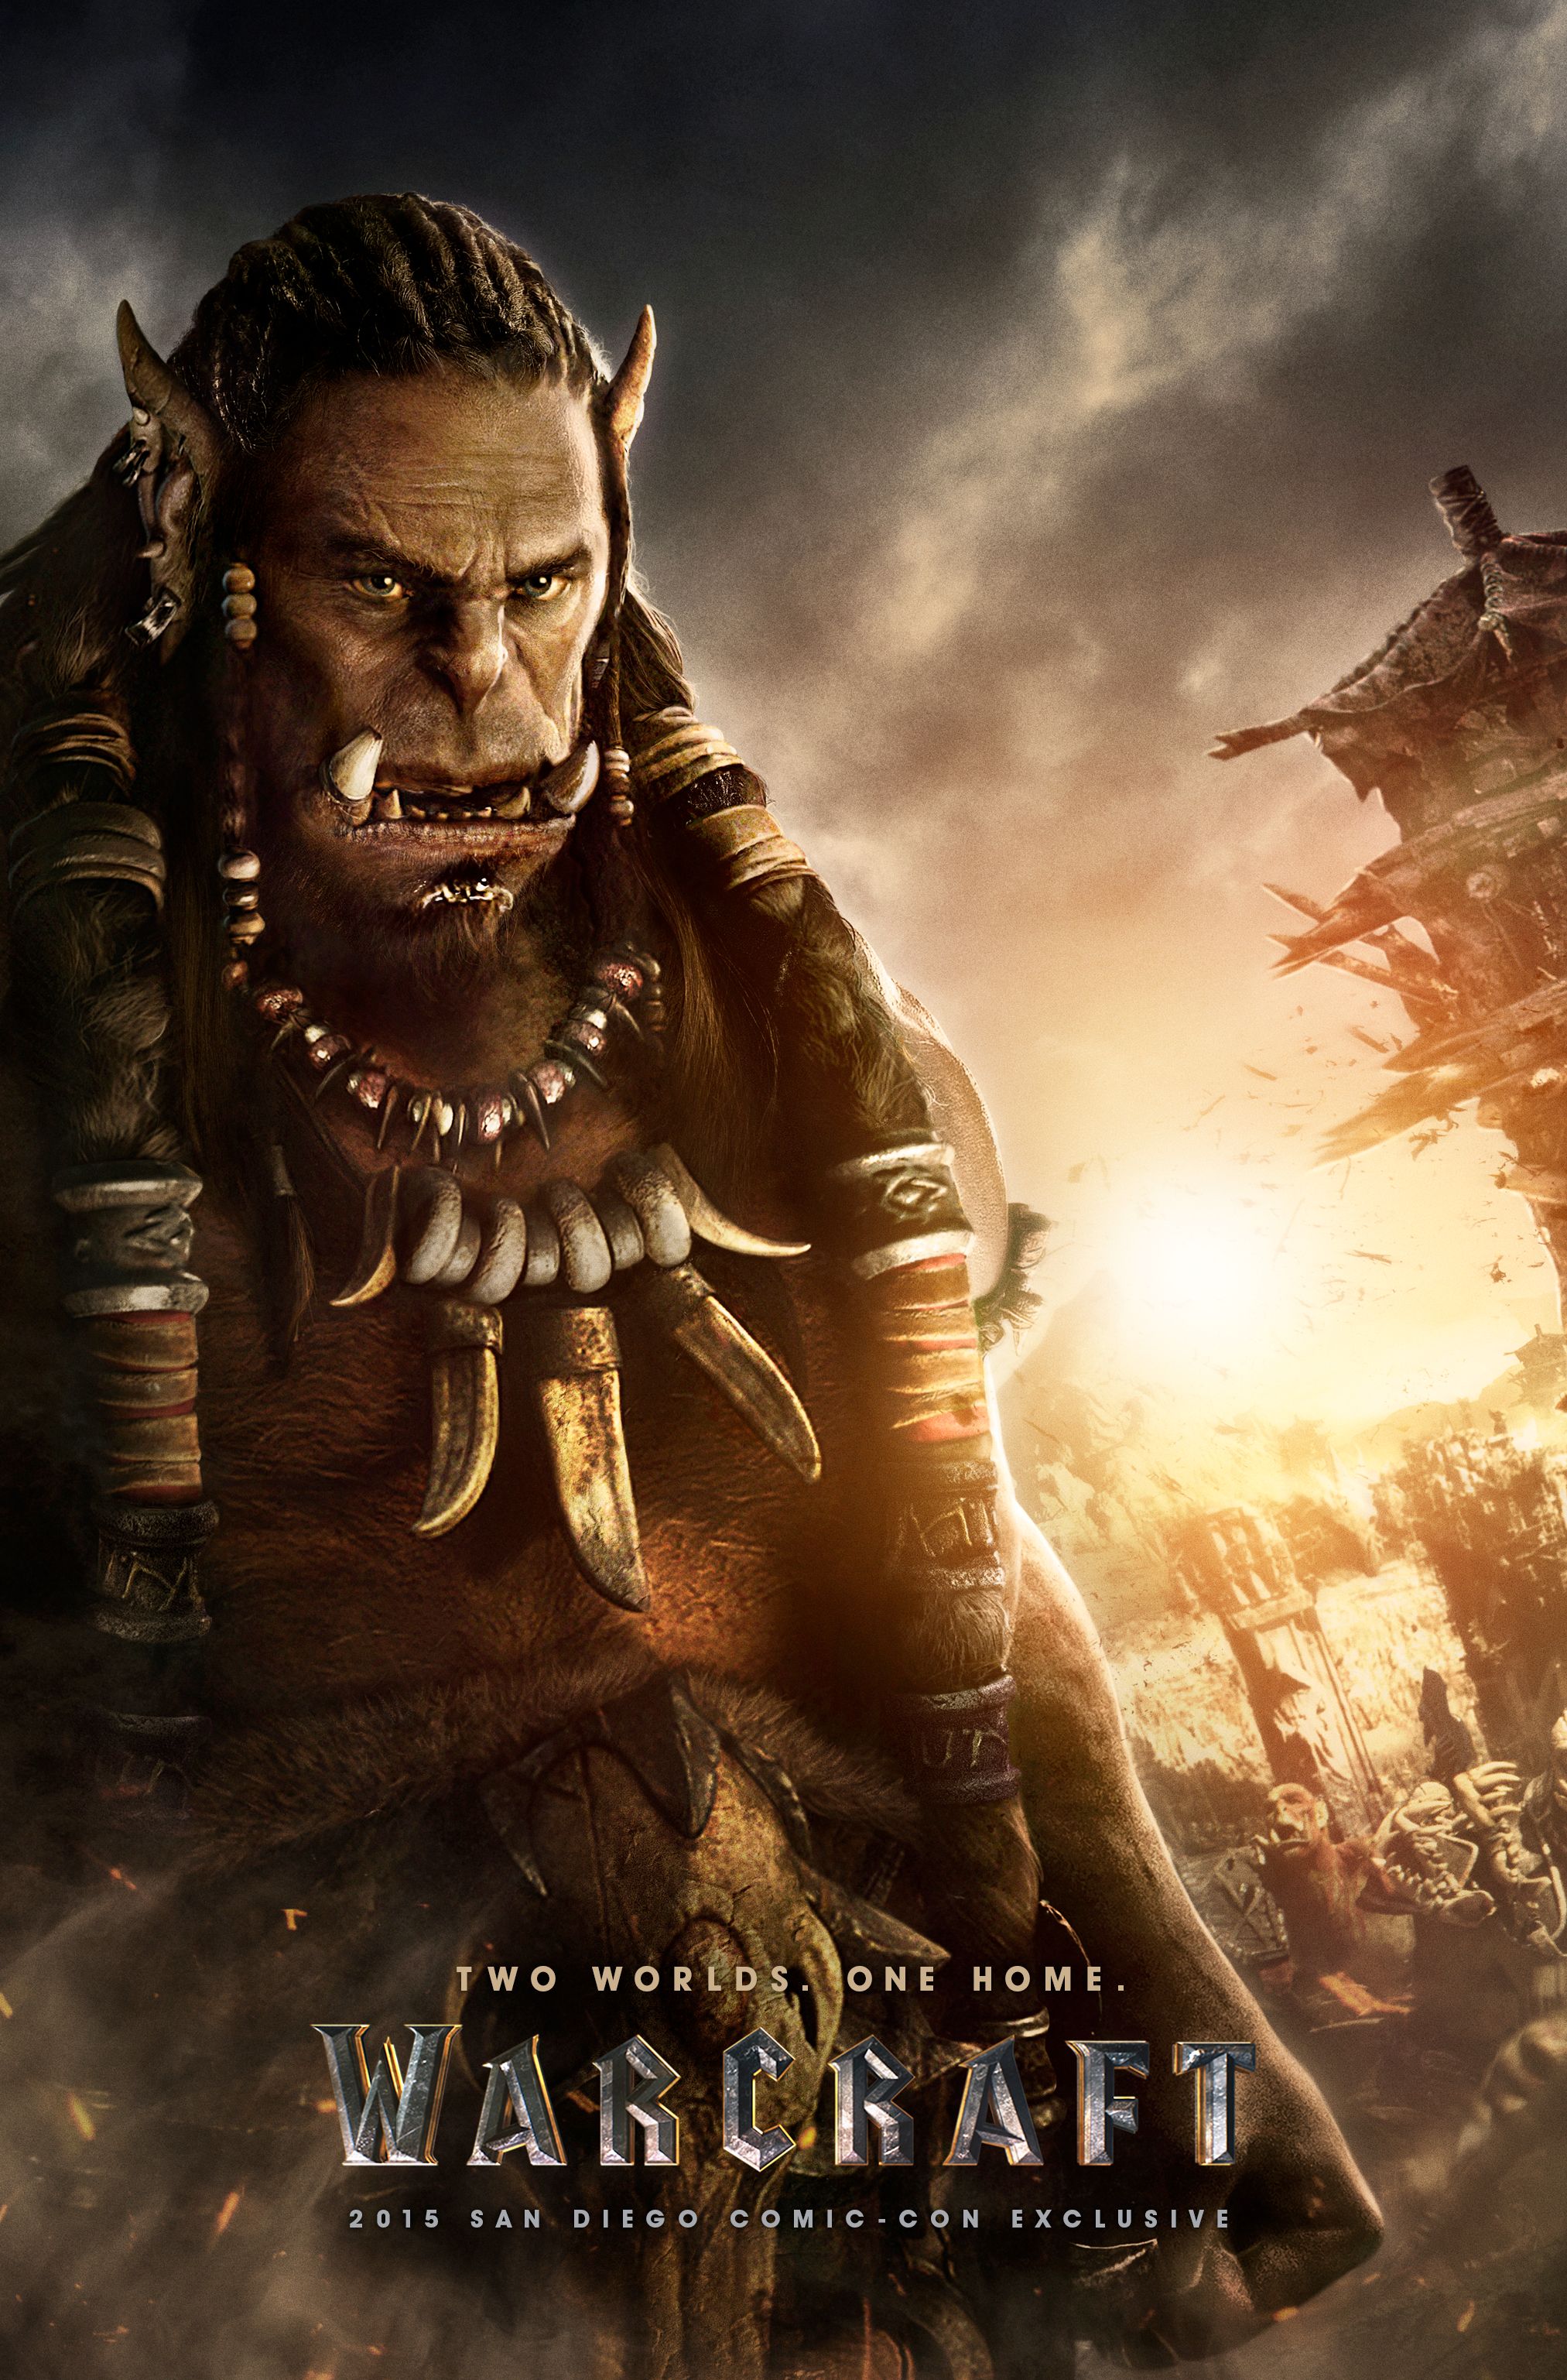 Warcraft Comic Con Poster 2